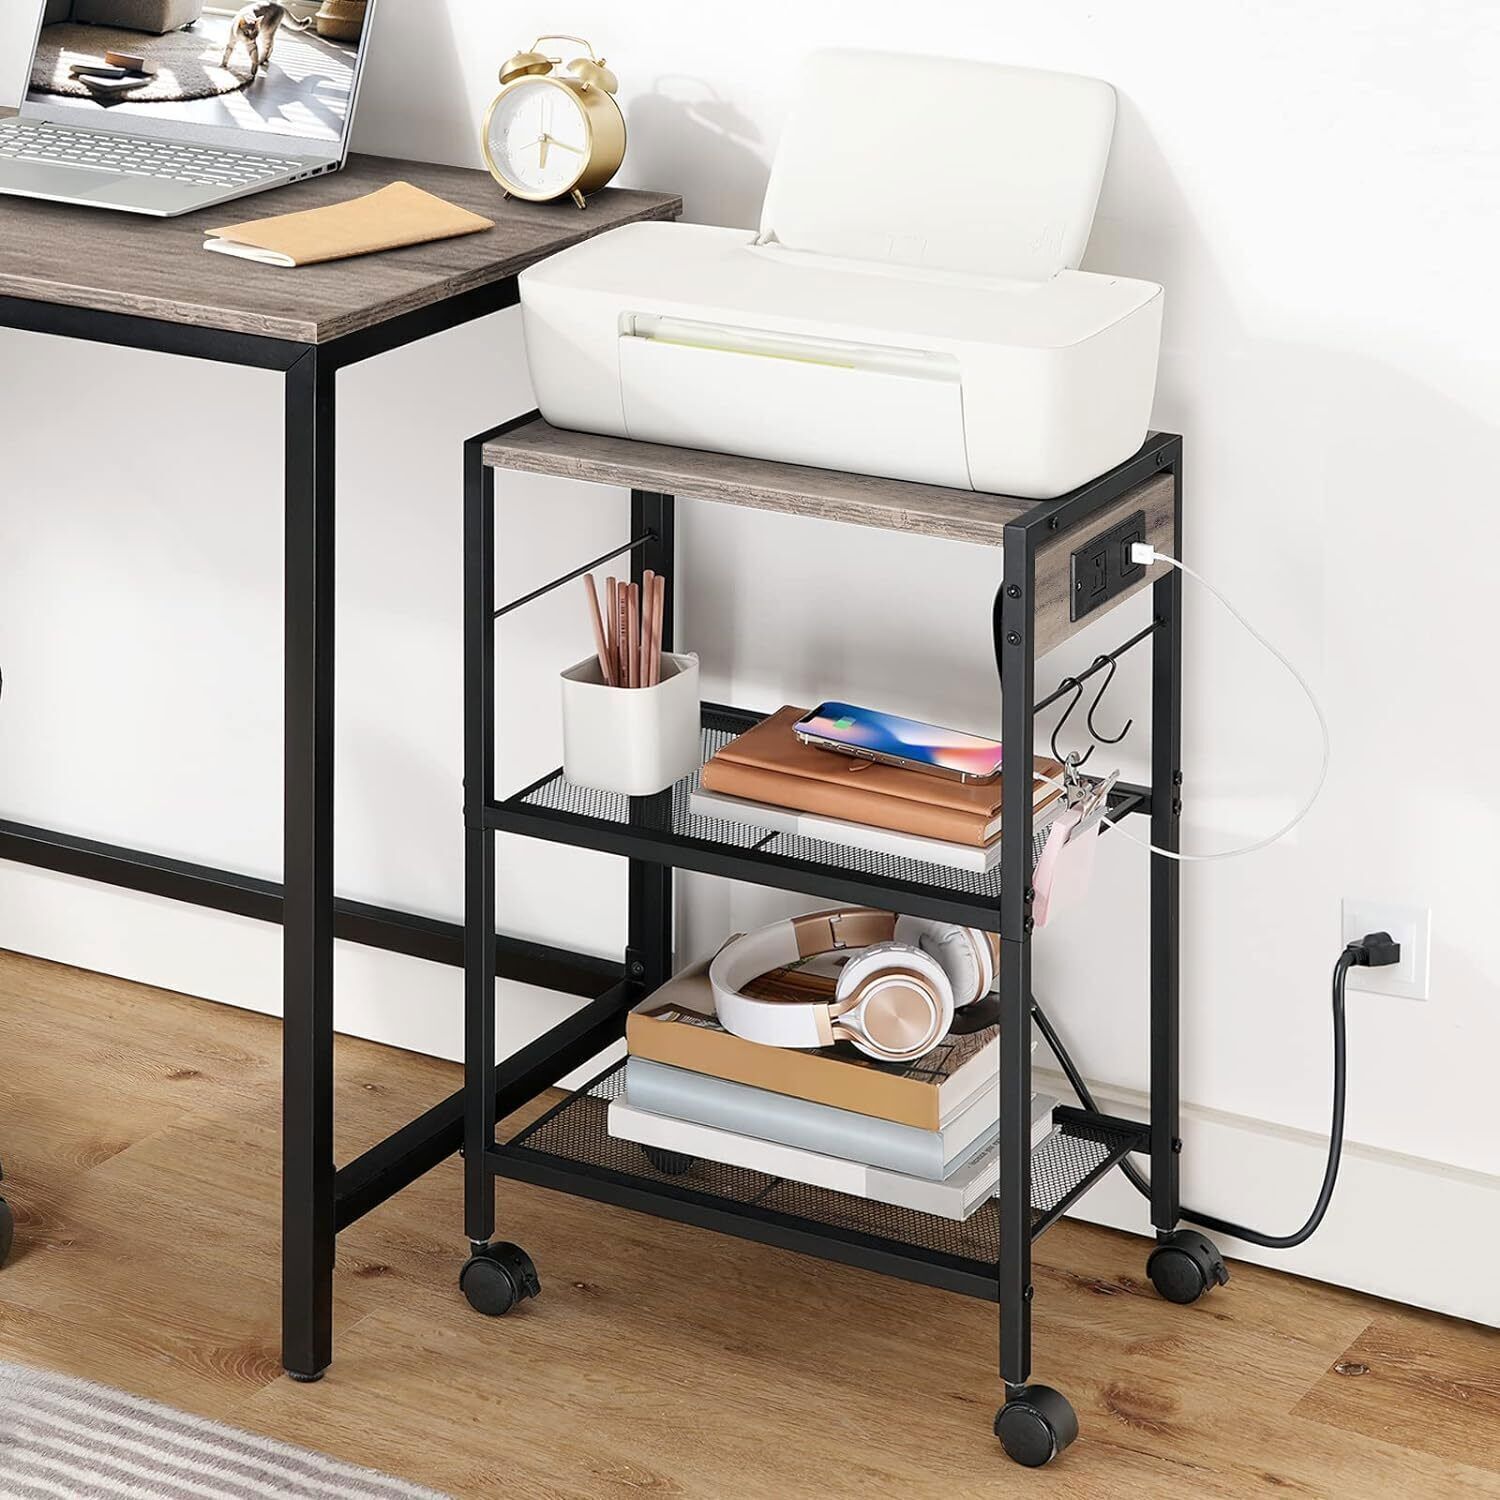 Printer Stand Mobile Printer Table Rolling Cart w/ Power Outlets and USB Ports